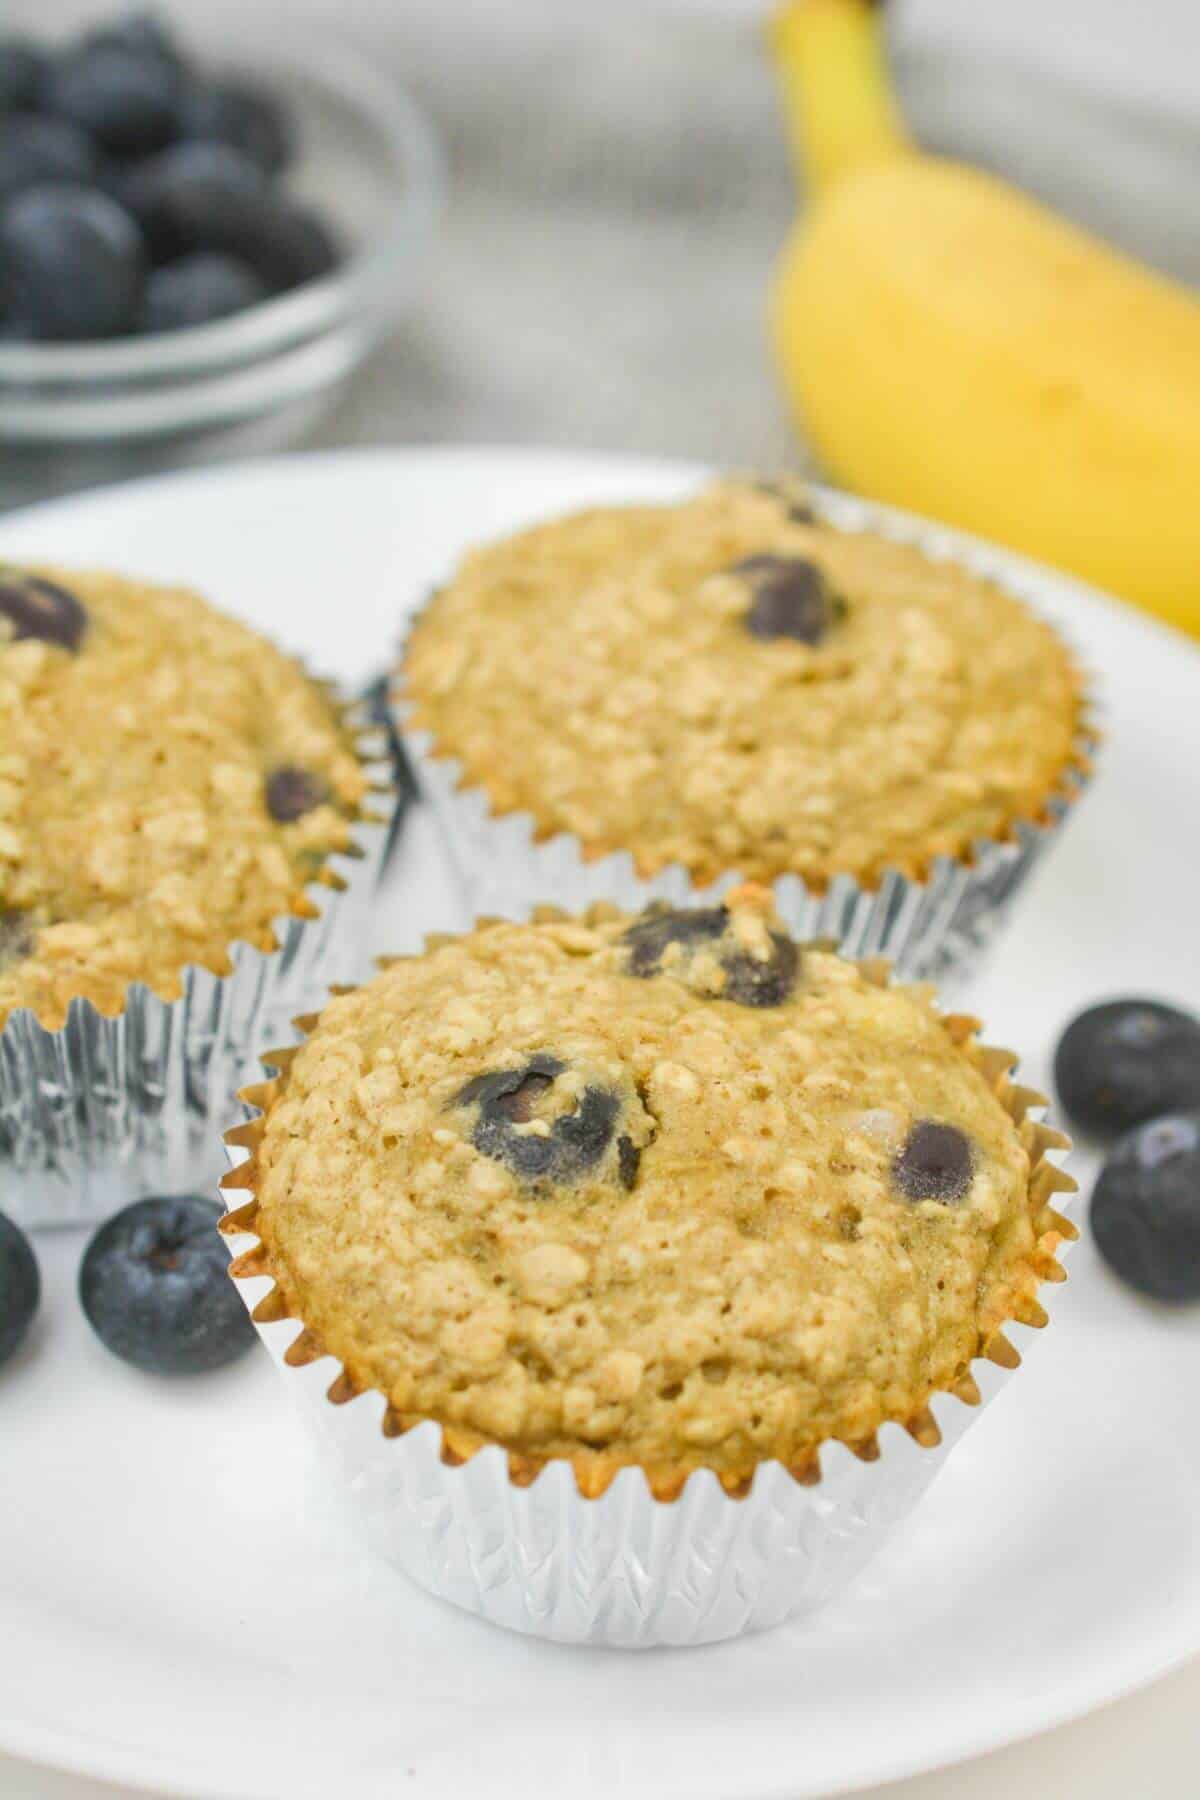 Oat blueberry muffins with fresh berries and bananas.